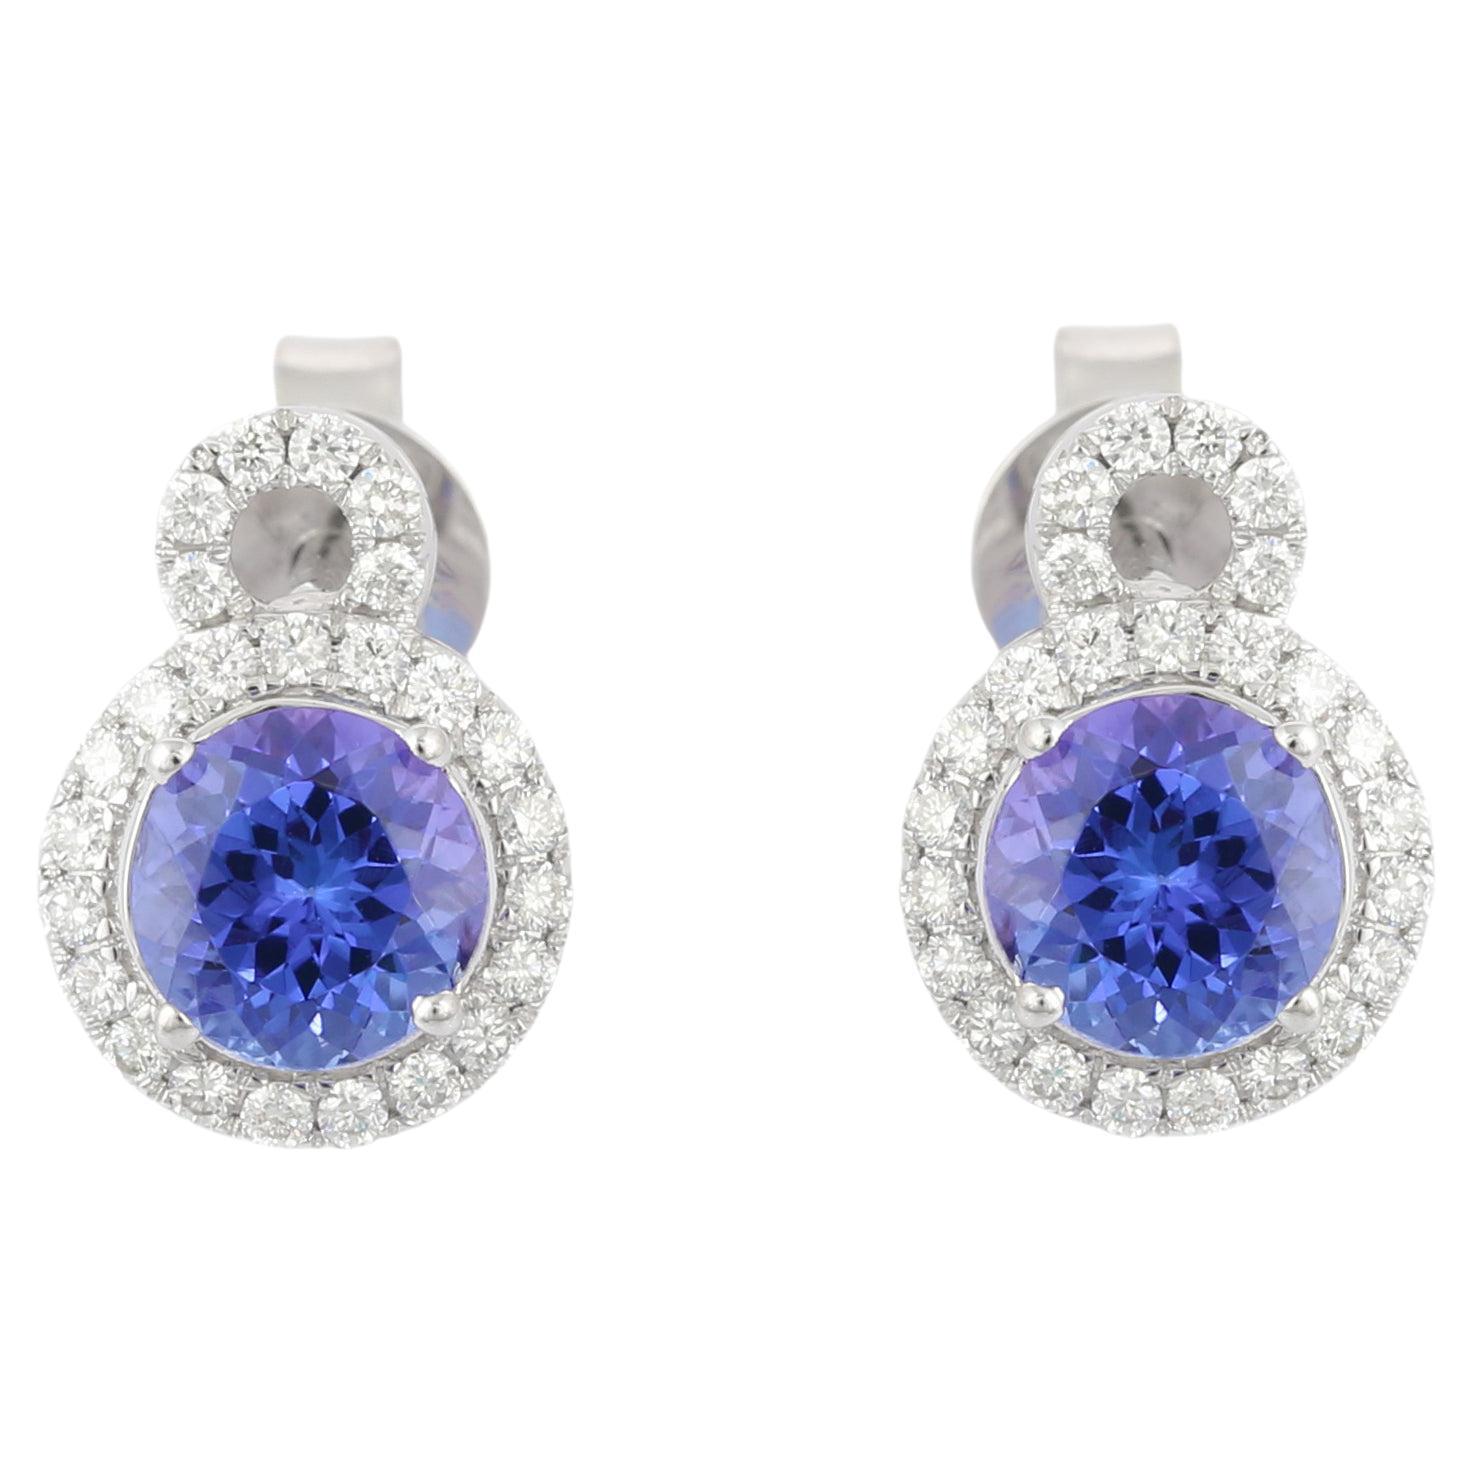 1.75 Carat Tanzanite Stud Earrings with Fine Diamonds in 18K White Gold For Sale